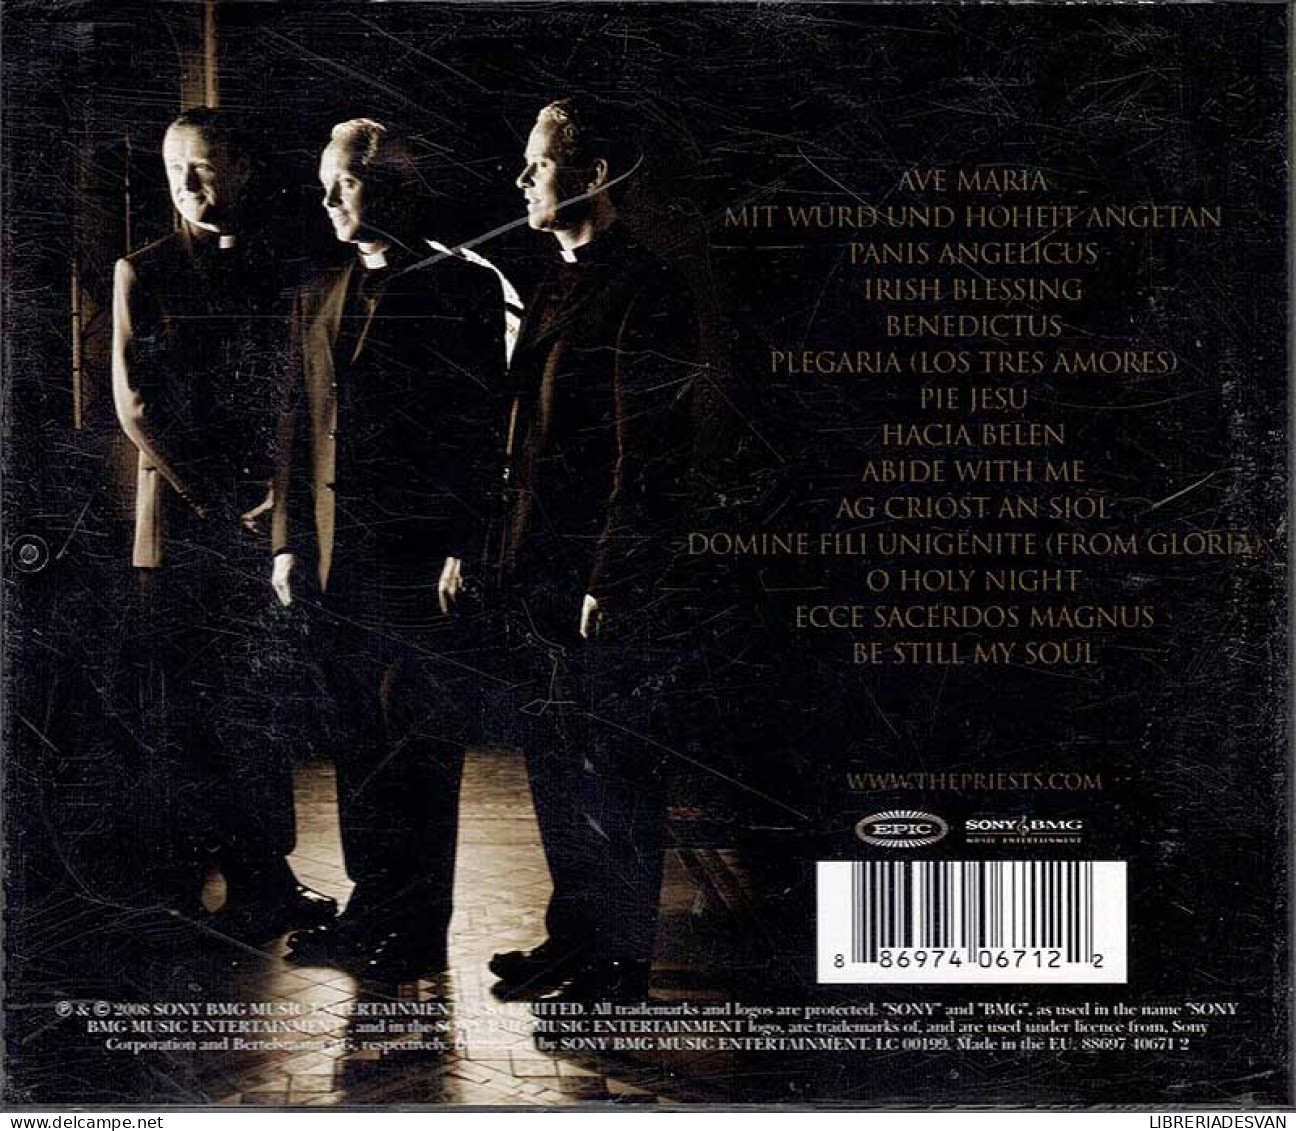 The Priests - The Priests. CD - Classique